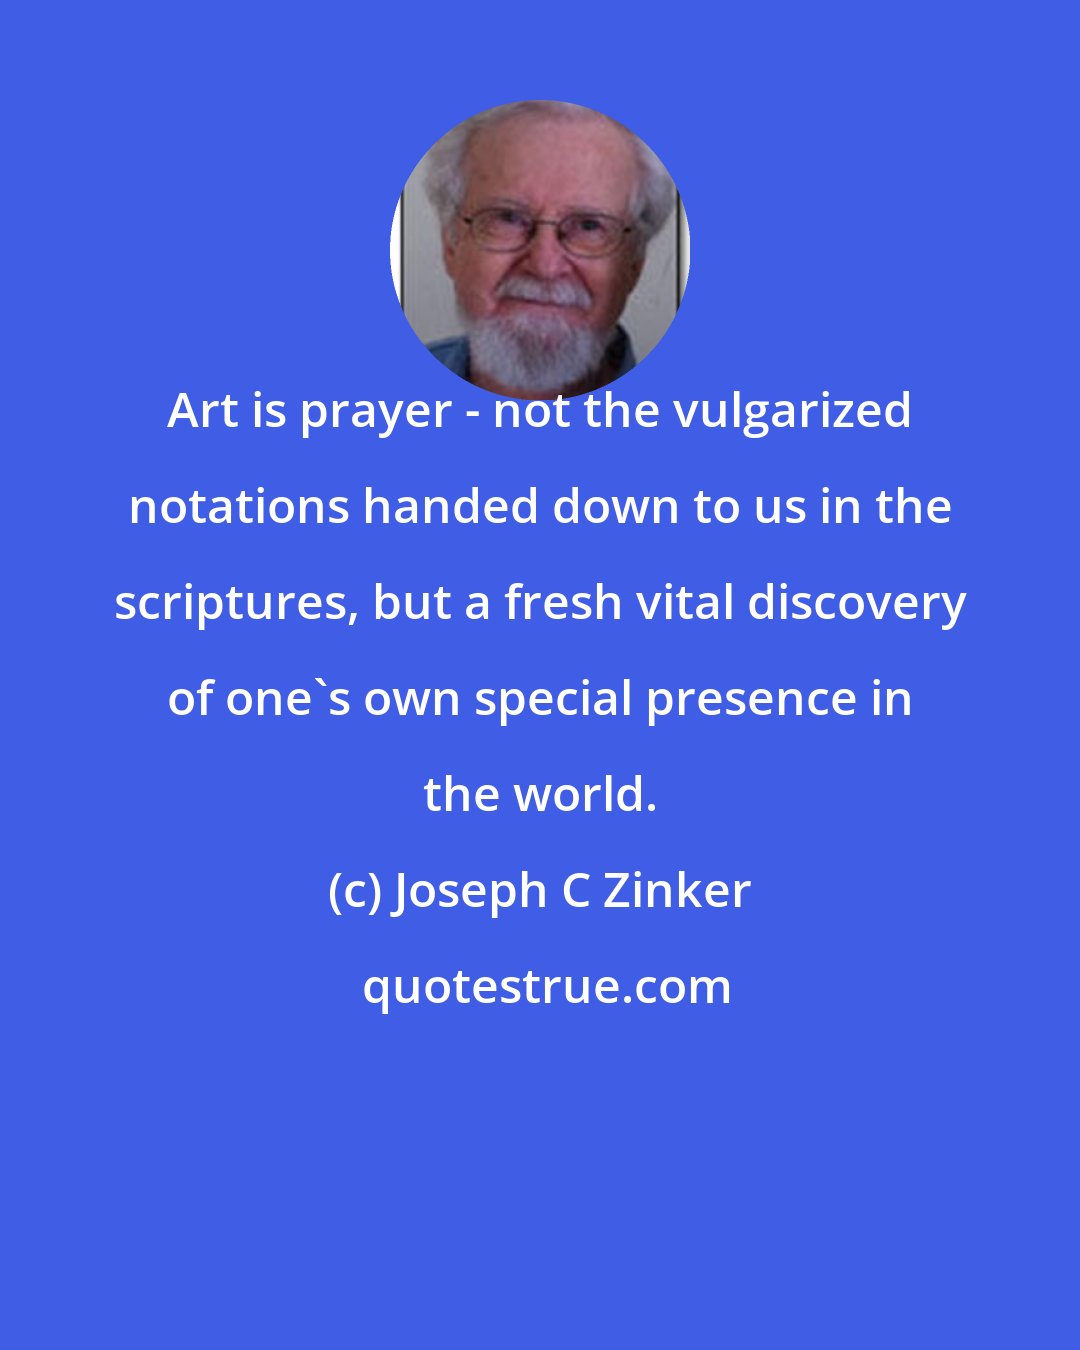 Joseph C Zinker: Art is prayer - not the vulgarized notations handed down to us in the scriptures, but a fresh vital discovery of one's own special presence in the world.